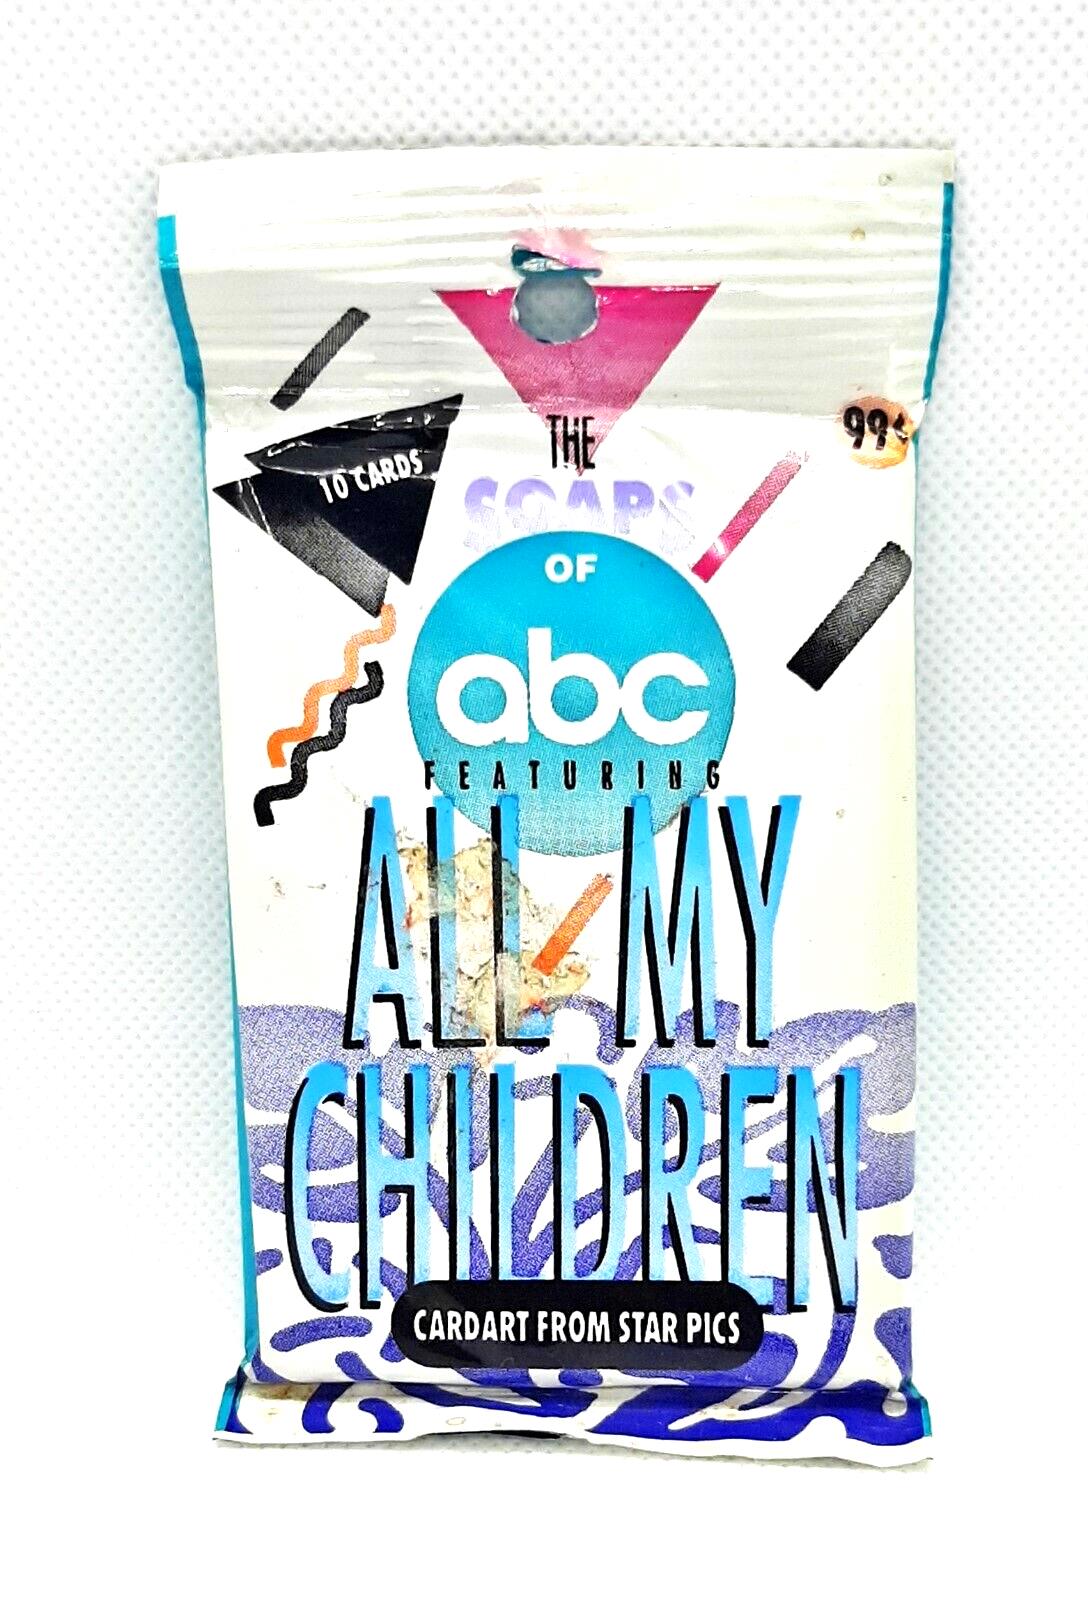 ABC All My Children Soap Opera 1991 Trading Card Pack